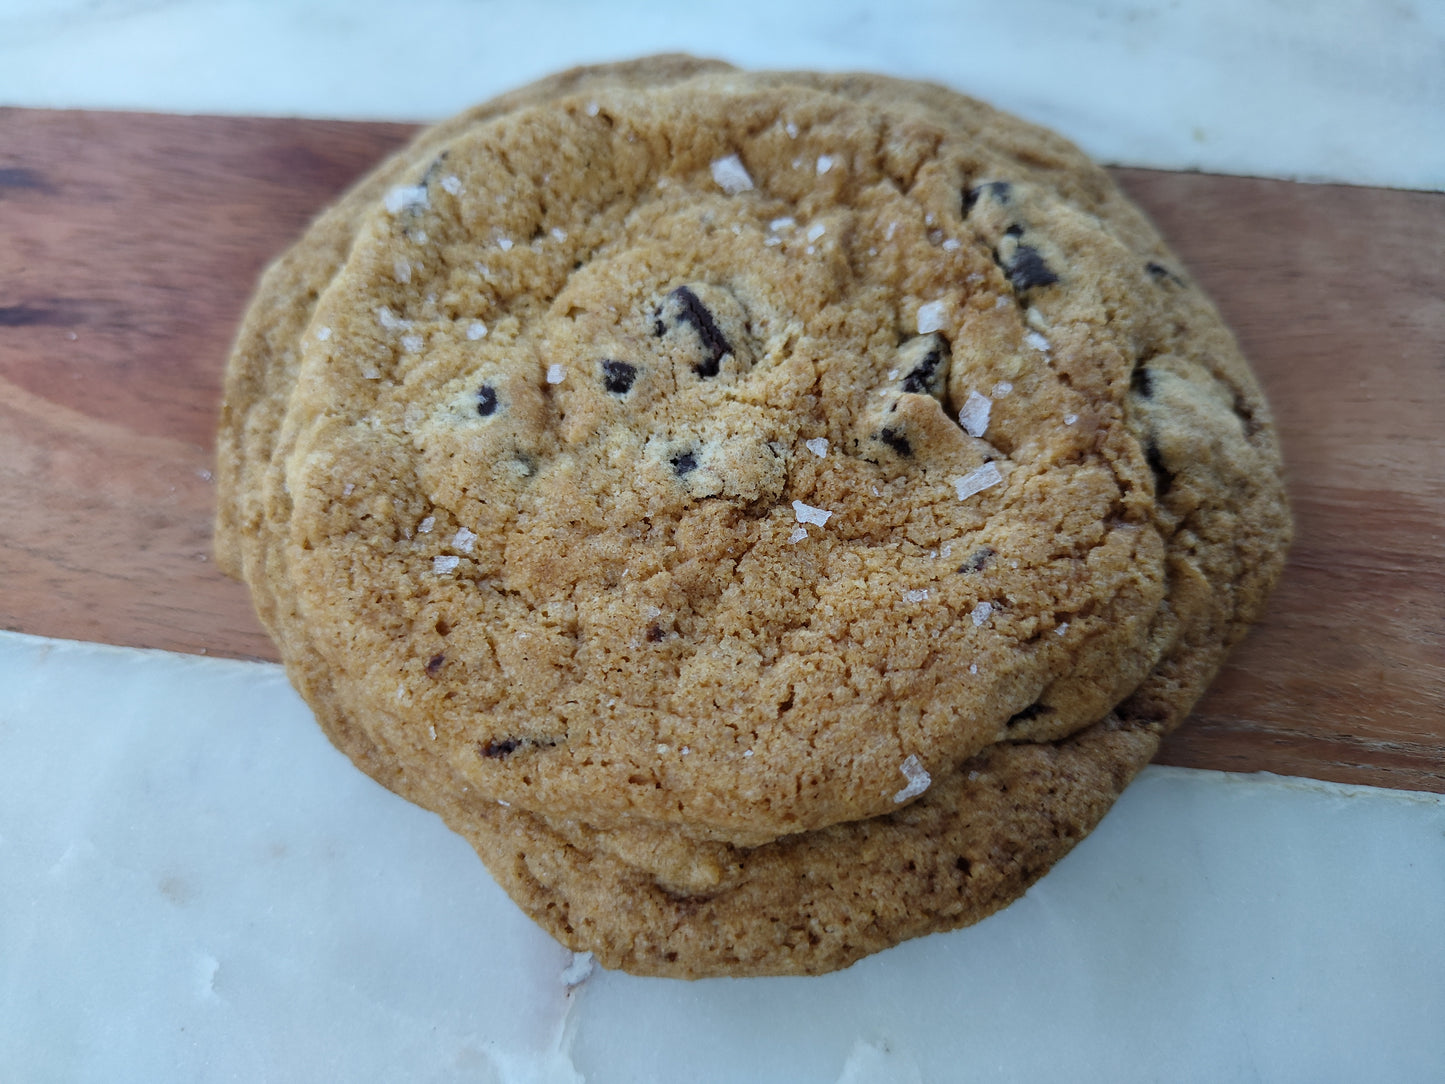 Chocolate Chunk Cookie-Thanksgiving